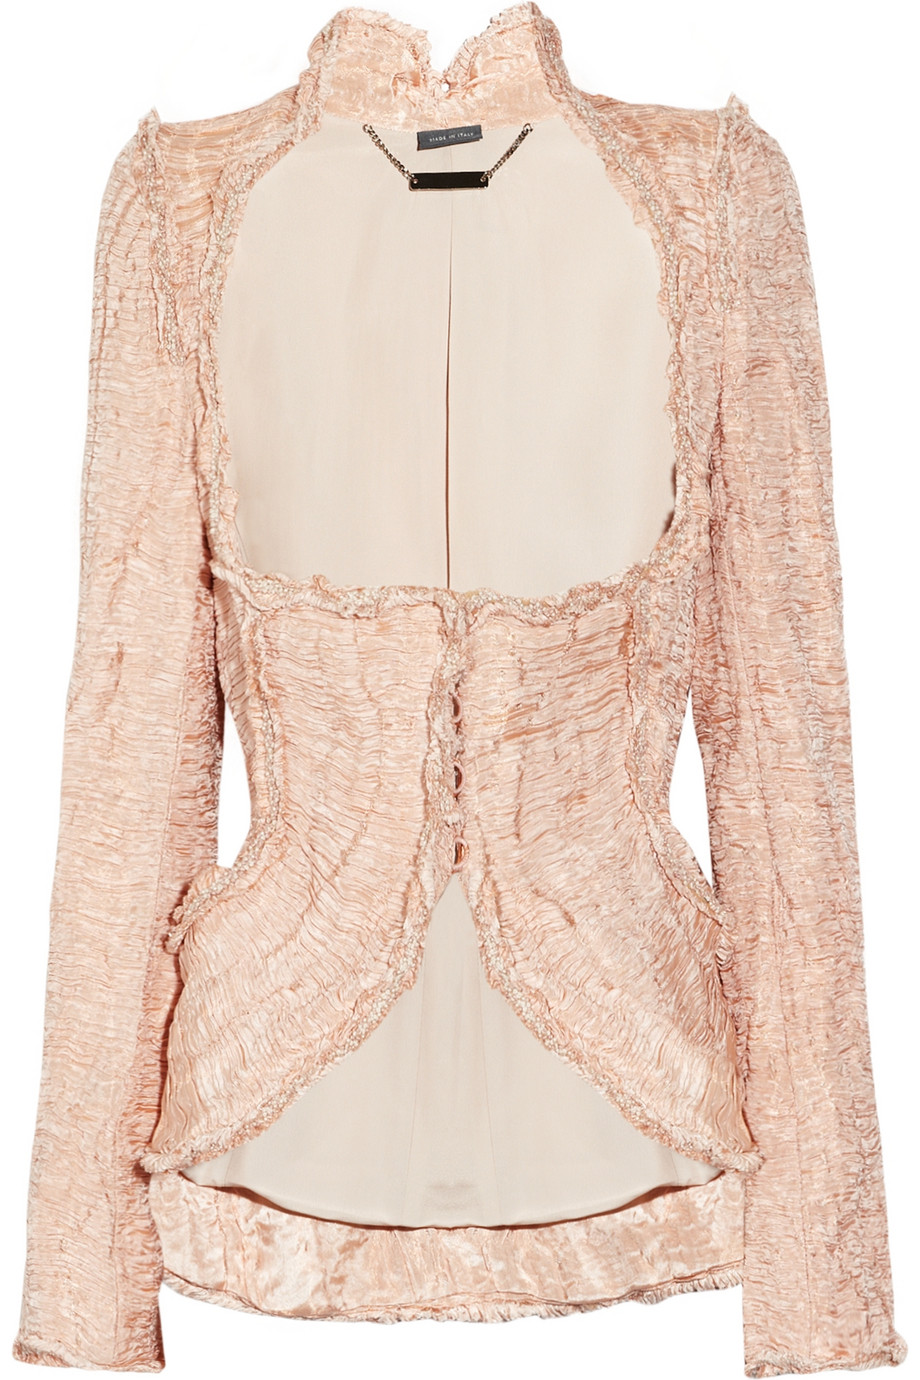 Alexander mcqueen Embellished Crinkled Organza and Copper Thread Jacket ...